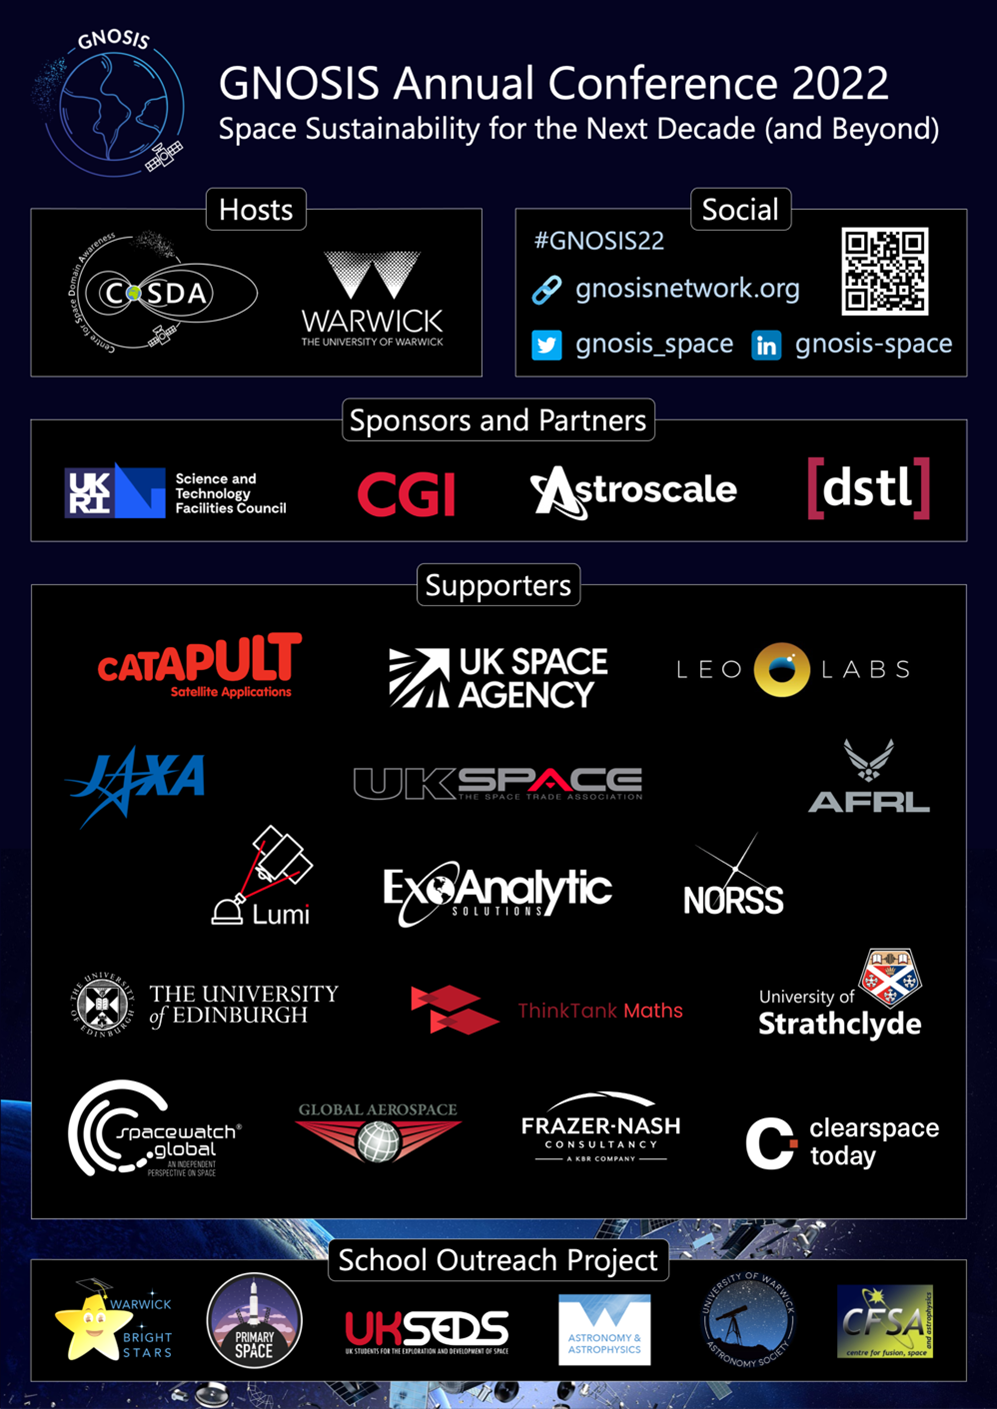 Various logos of sponsors and supporters of GNOSIS conference